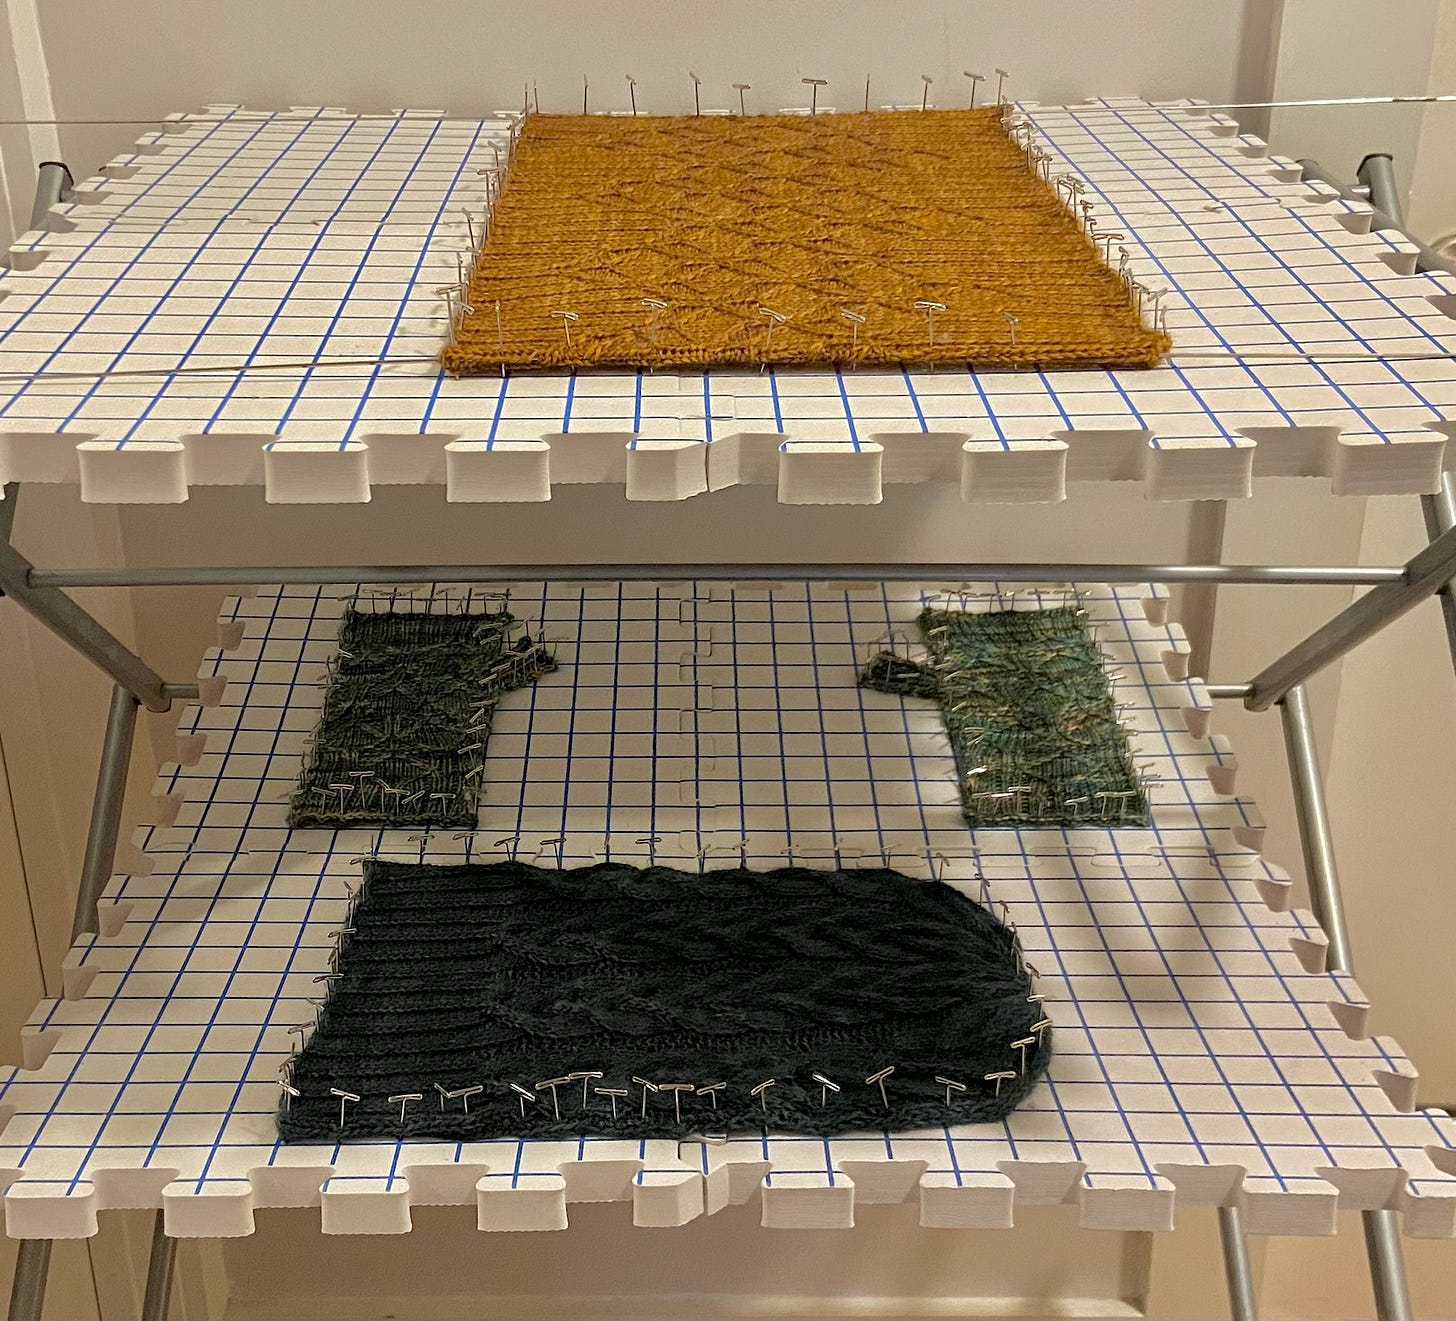 (top to bottom) An orange cowl, greenish-blue fingerless gloves, and a green hat all pinned and blocked on two foam-like puzzle pieces used for blocking knitted garments. They're resting on two rows of a drying rack. The cowl has two metal bars to help with the blocking.